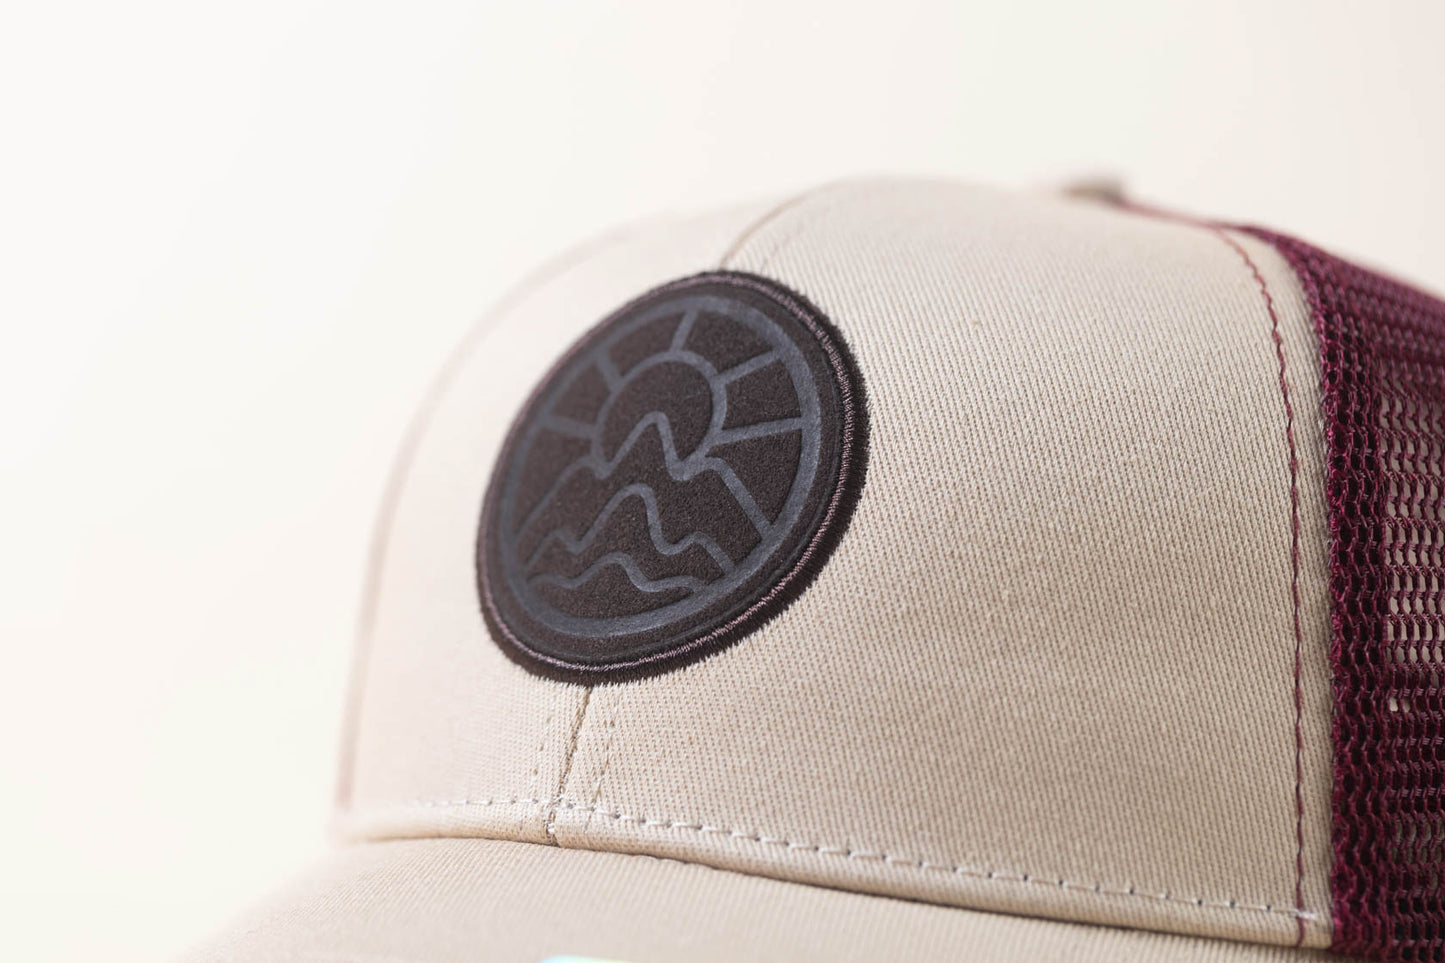 Trucker Hat - 6 Panel with Suede Leather McClumsy Patch - Light Tan and Maroon